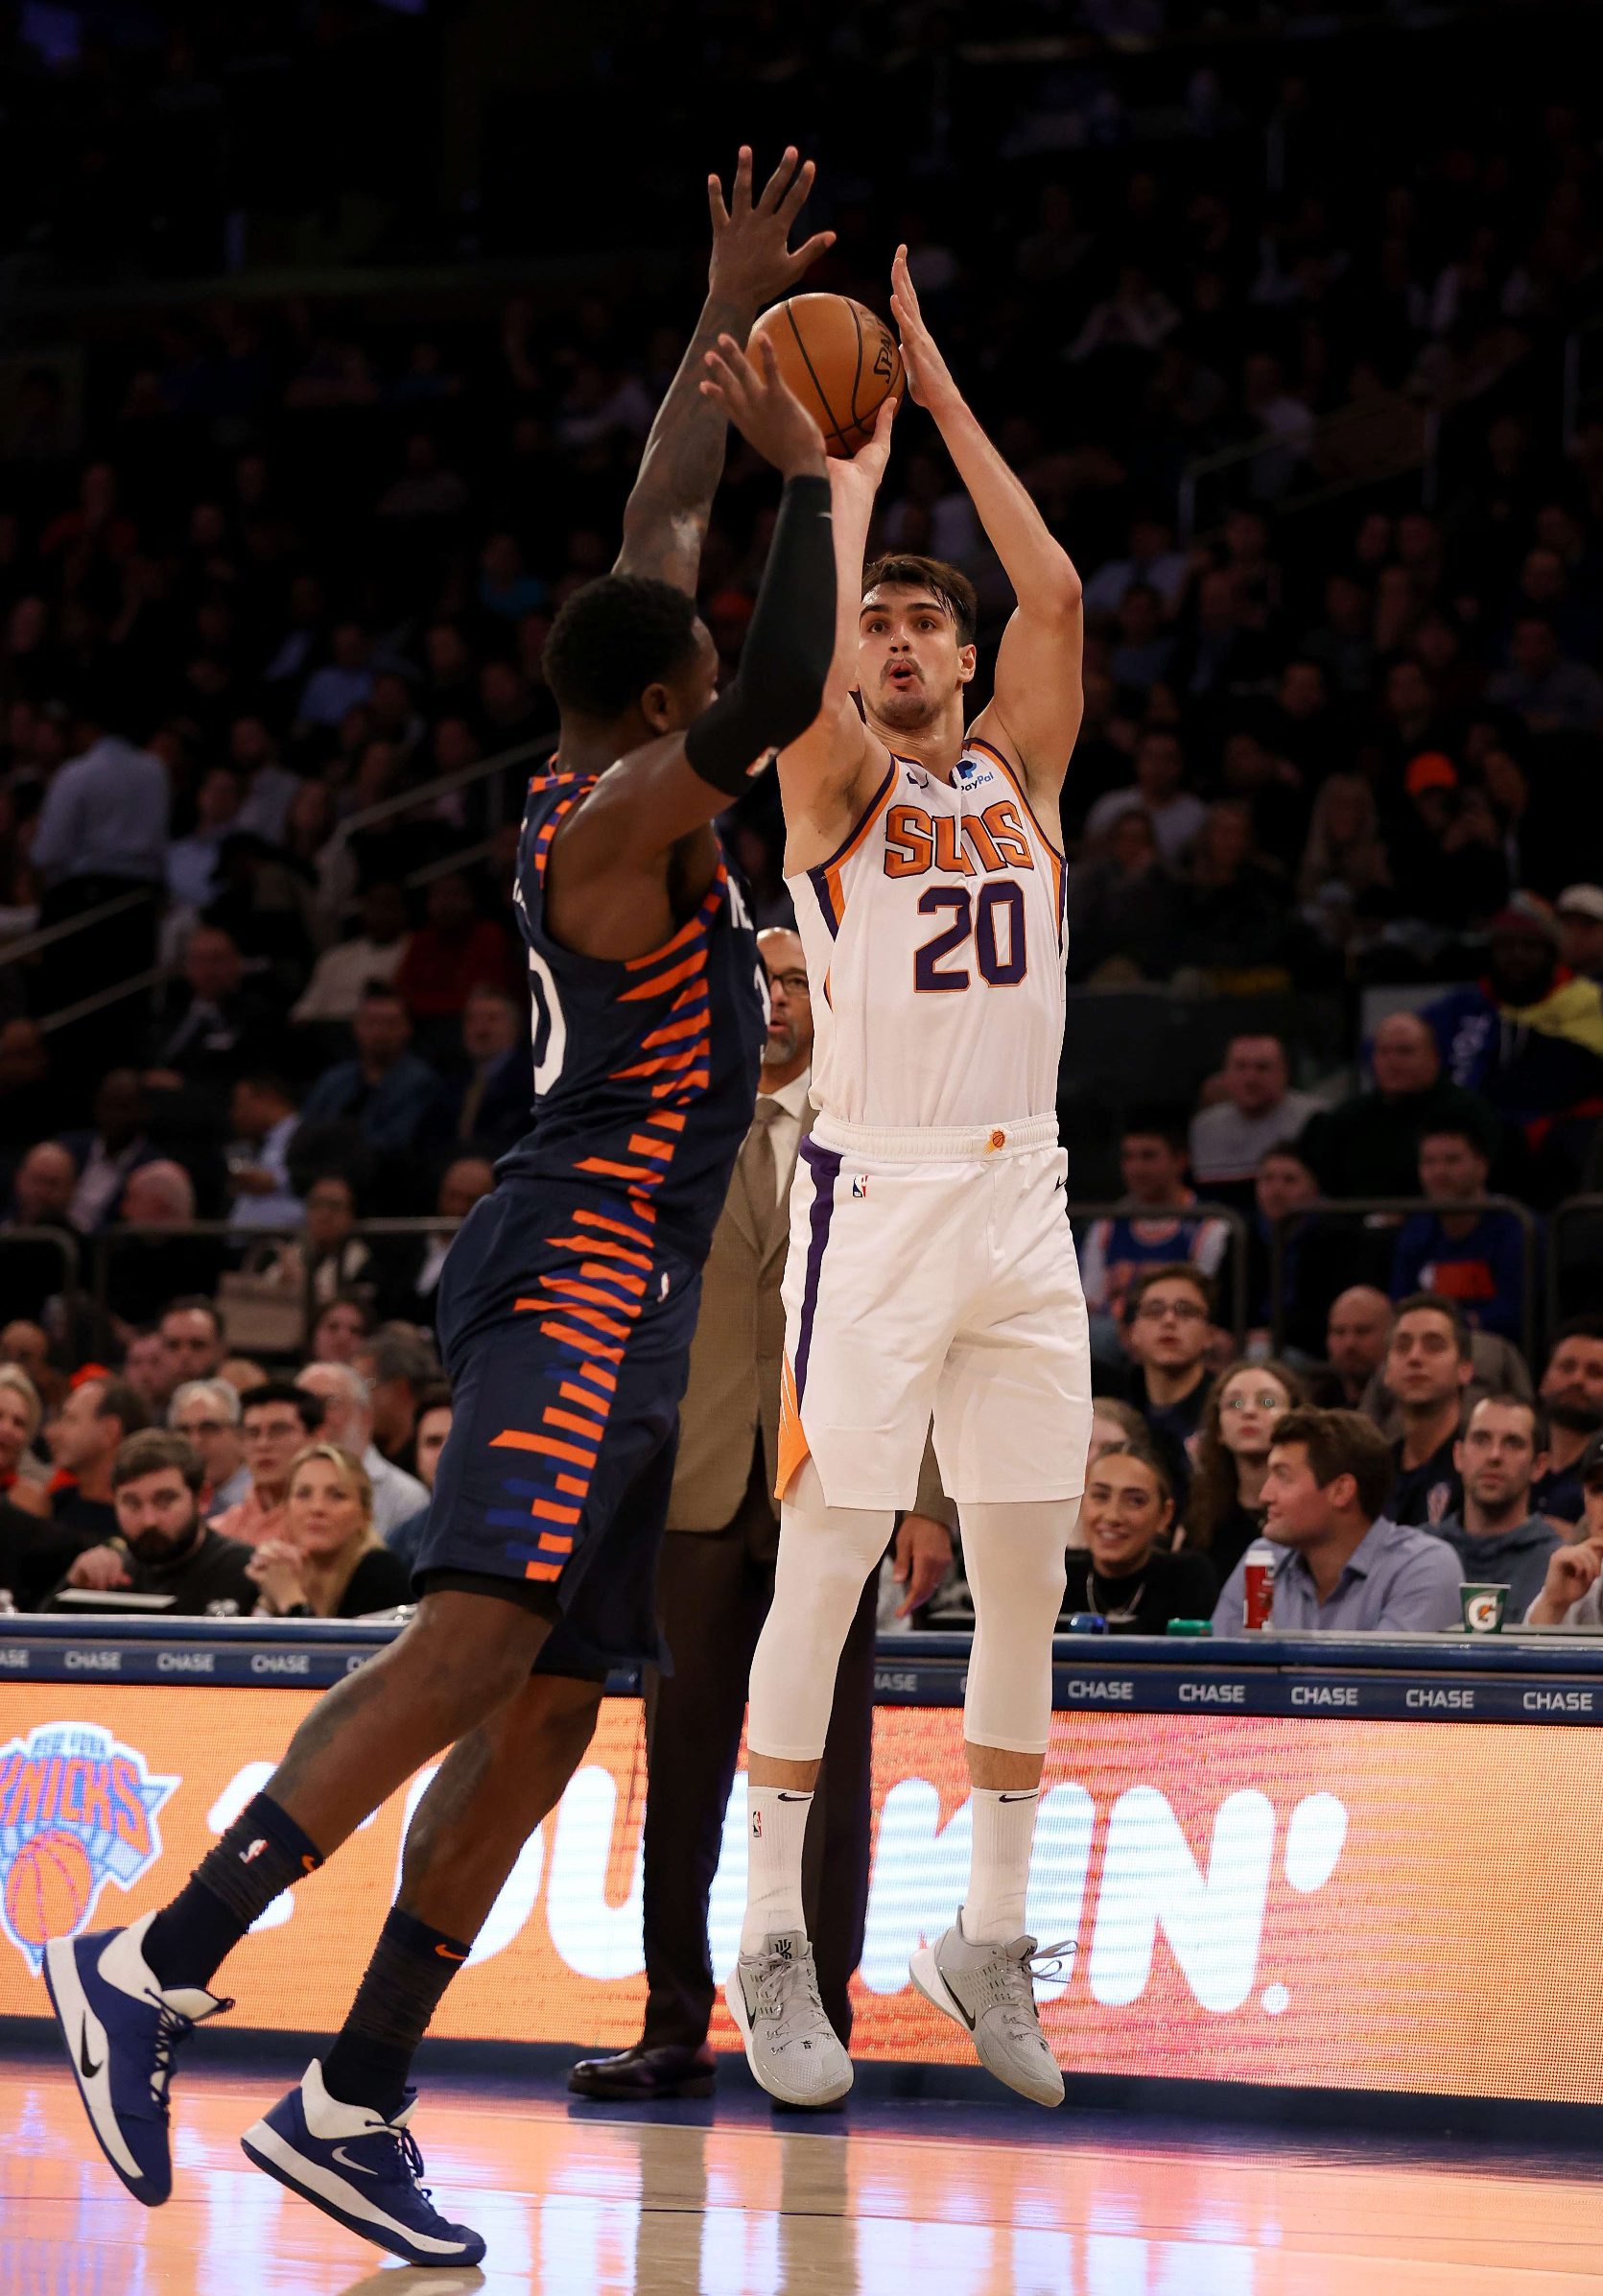 NEW YORK, NEW YORK - JANUARY 16: Dario Saric #20 of the Phoenix Suns takes a shot as Julius Randle #30 of the New York Knicks defends at Madison Square Garden on January 16, 2020 in New York City.The Phoenix Suns defeated the New York Knicks 121-98.NOTE TO USER: User expressly acknowledges and agrees that, by downloading and or using this photograph, User is consenting to the terms and conditions of the Getty Images License Agreement.   Elsa/Getty Images/AFP
== FOR NEWSPAPERS, INTERNET, TELCOS & TELEVISION USE ONLY ==